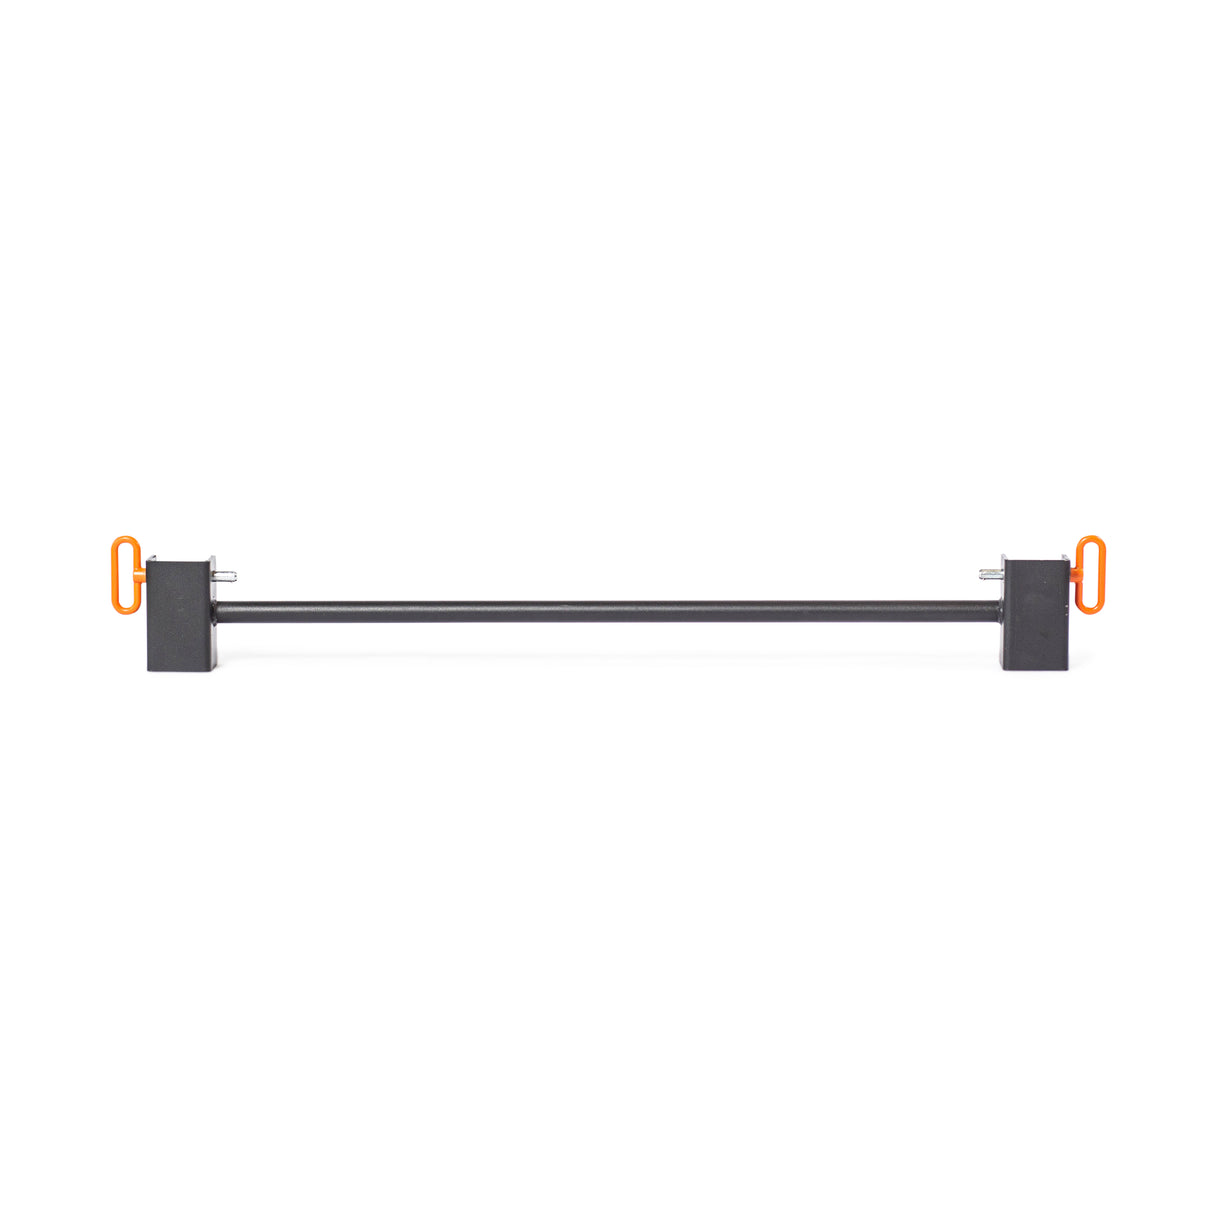 Adjustable Pull-up Bar Rack Attachment - Hydra for versatile upper body workouts